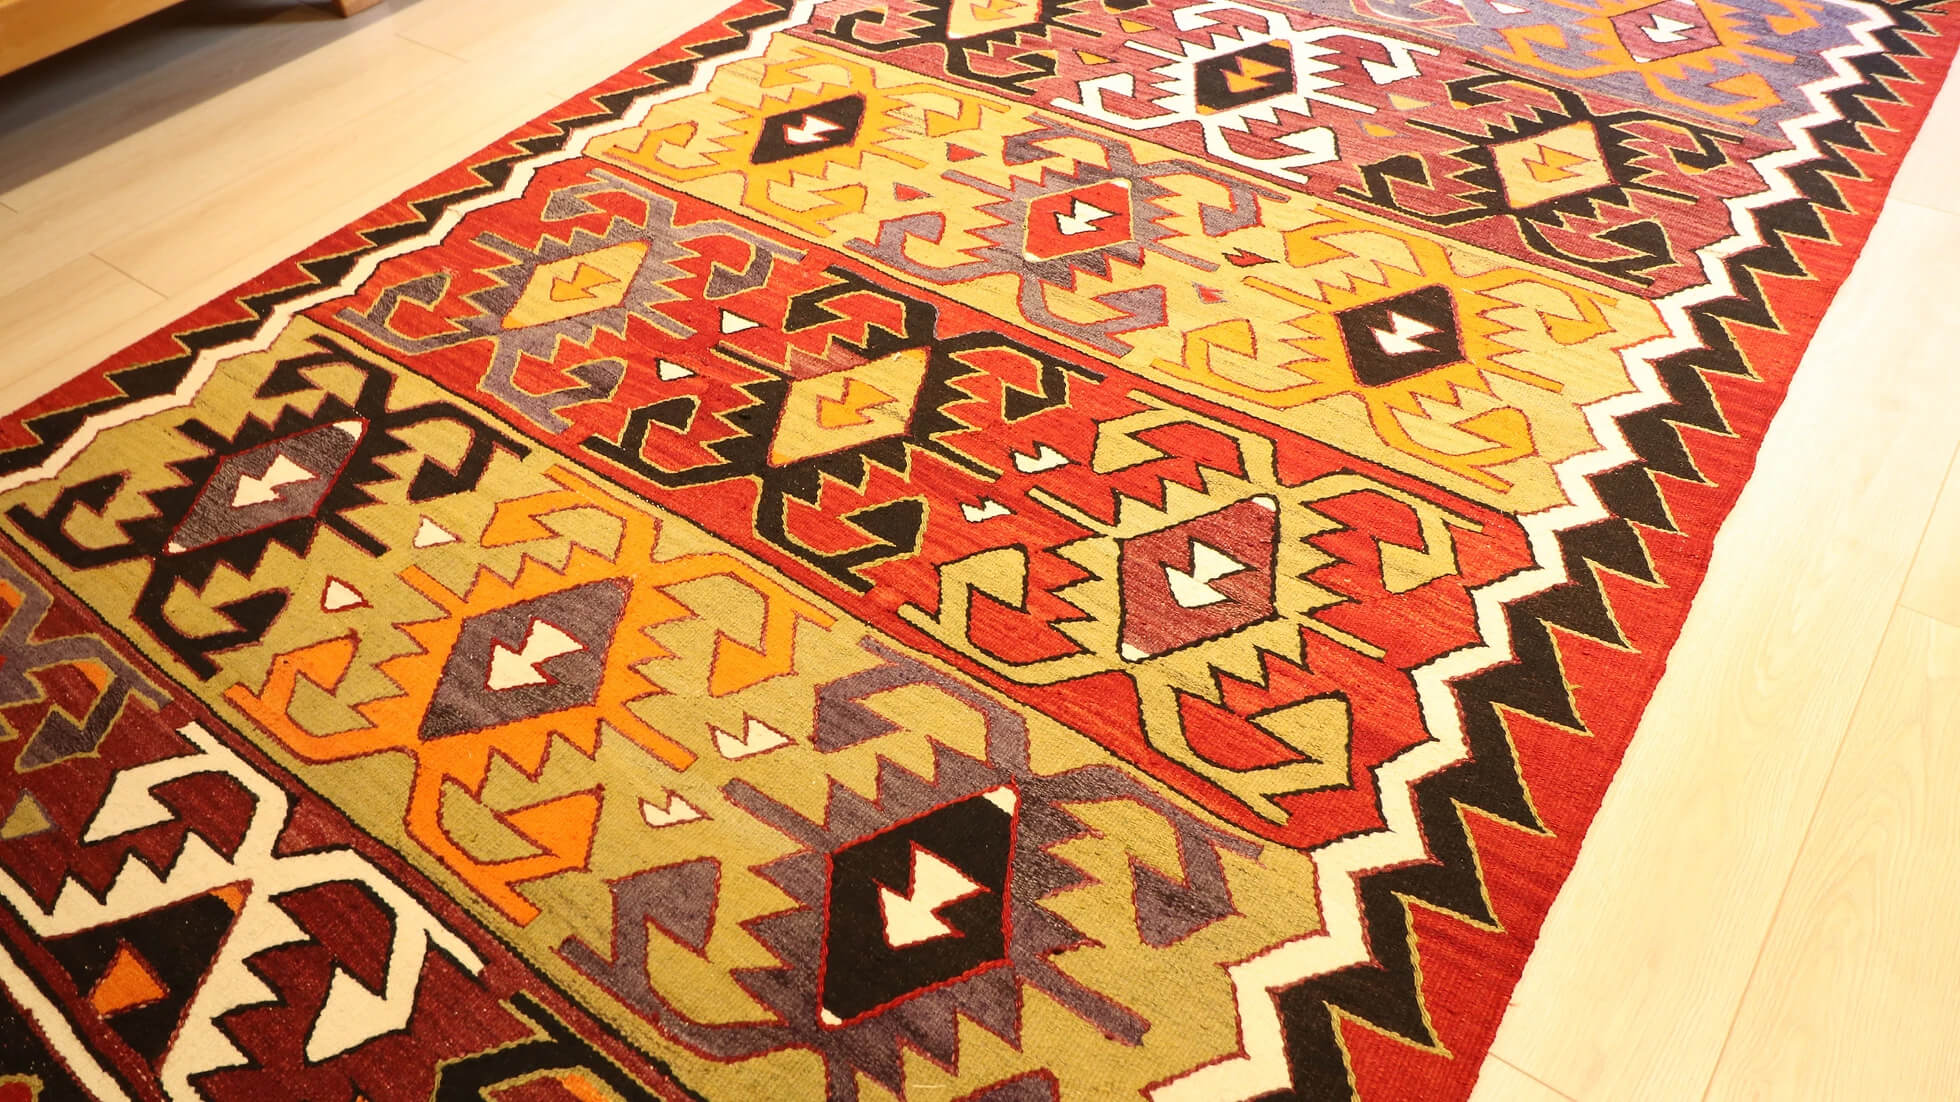 traditional hand-knotted Turkish rug from mid-century in red, black, green, and purple with geometric patterns